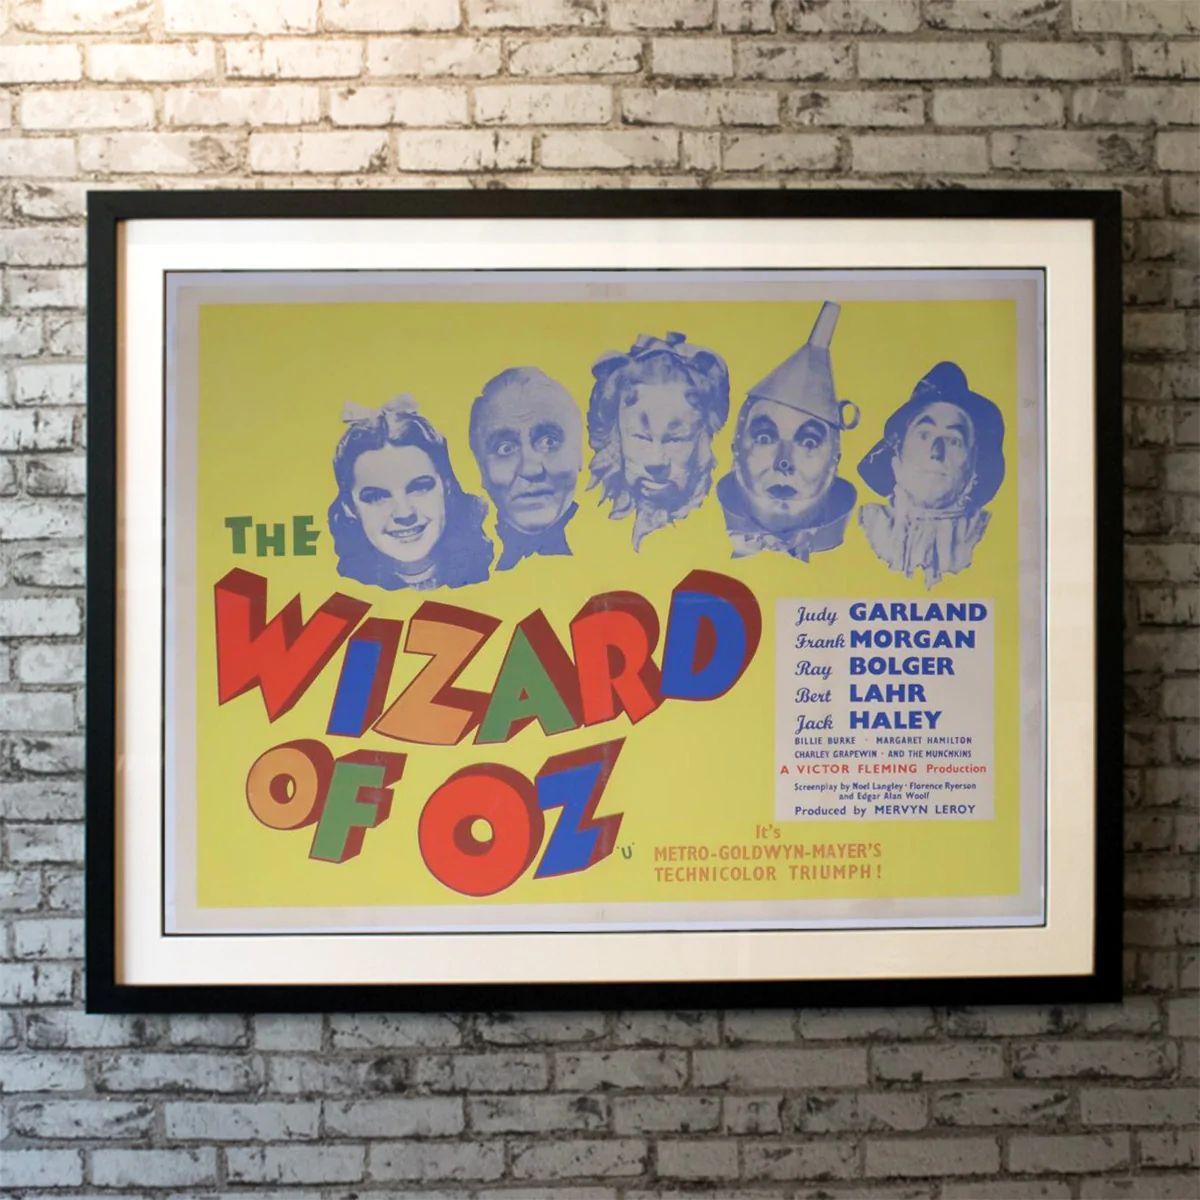 The Wizard of Oz, Unframed Poster, 1959r

Original British Quad (30 x 40 inches). Young Dorothy Gale and her dog Toto are swept away by a tornado from their Kansas farm to the magical Land of Oz, and embark on a quest with three new friends to see